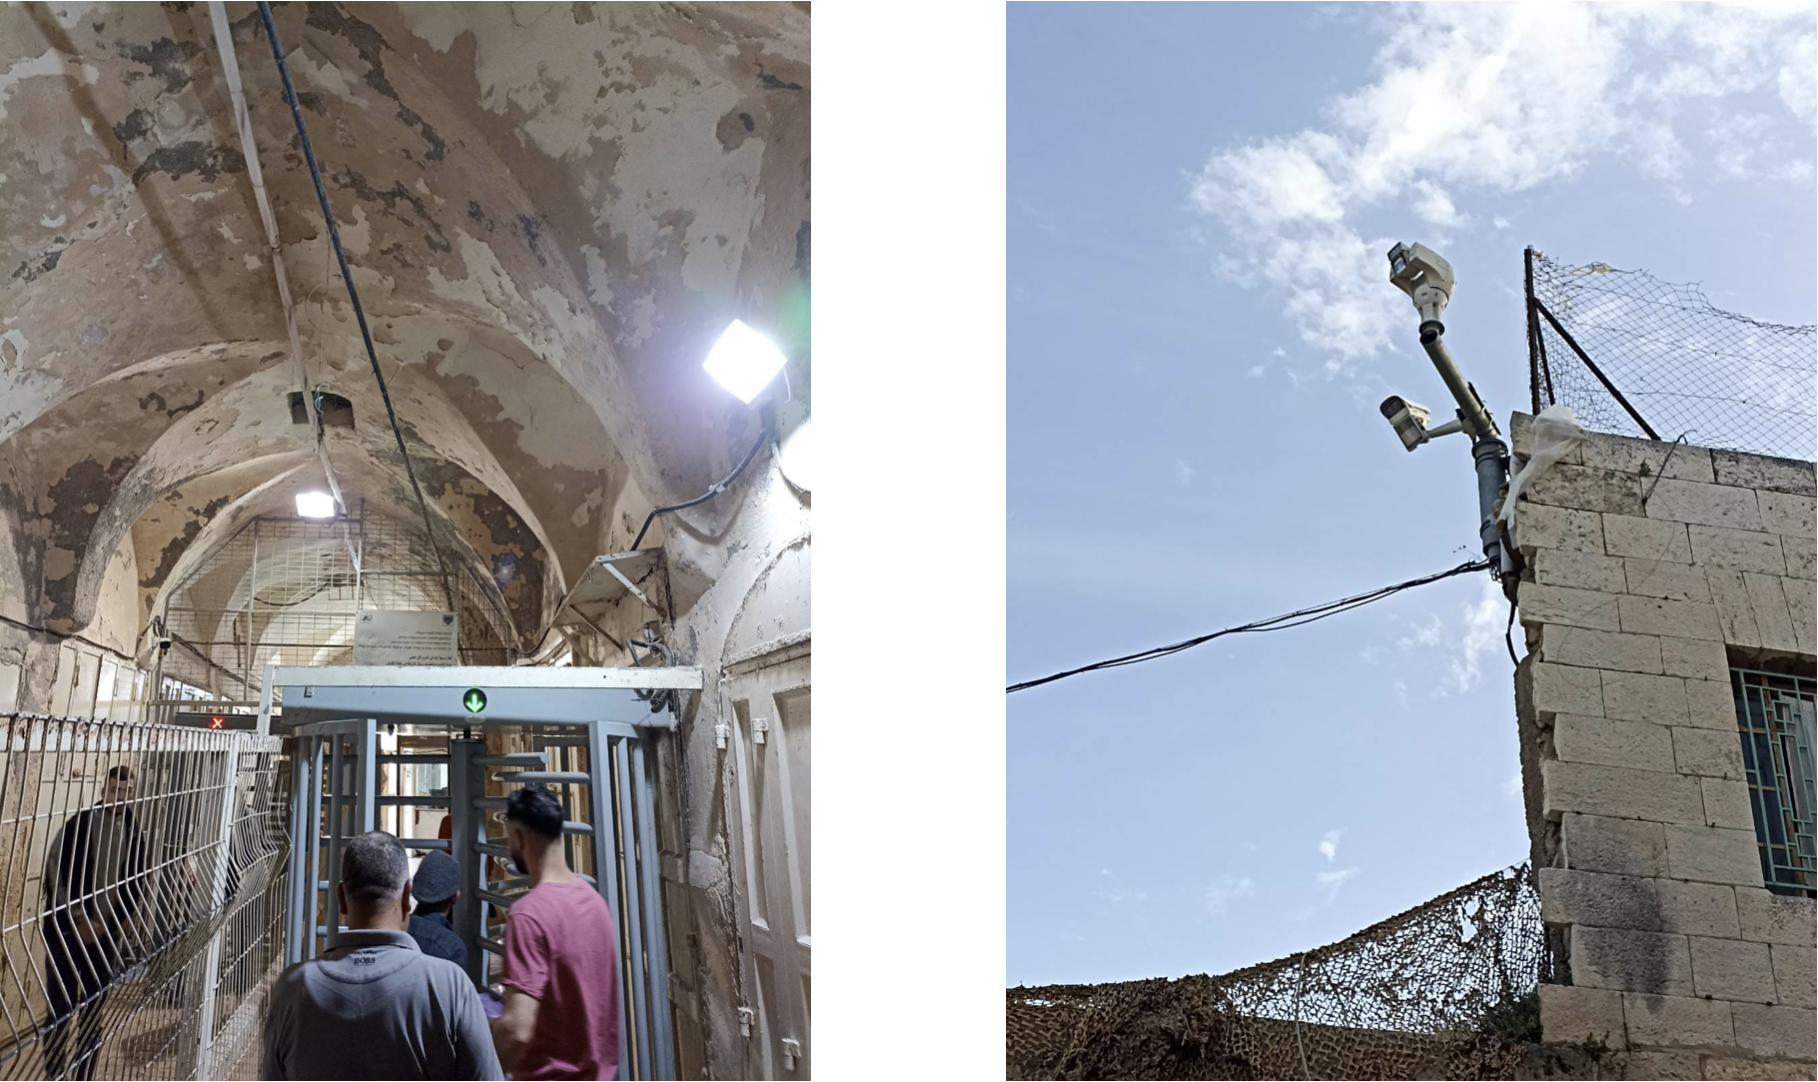 Photo on the left: checkpoint through which H2 Palestinians have to go through on a daily basis. Photo on the right: one of the many Israeli surveillance cameras on buildings in the H2 zone. Photos: Izzat Karaki